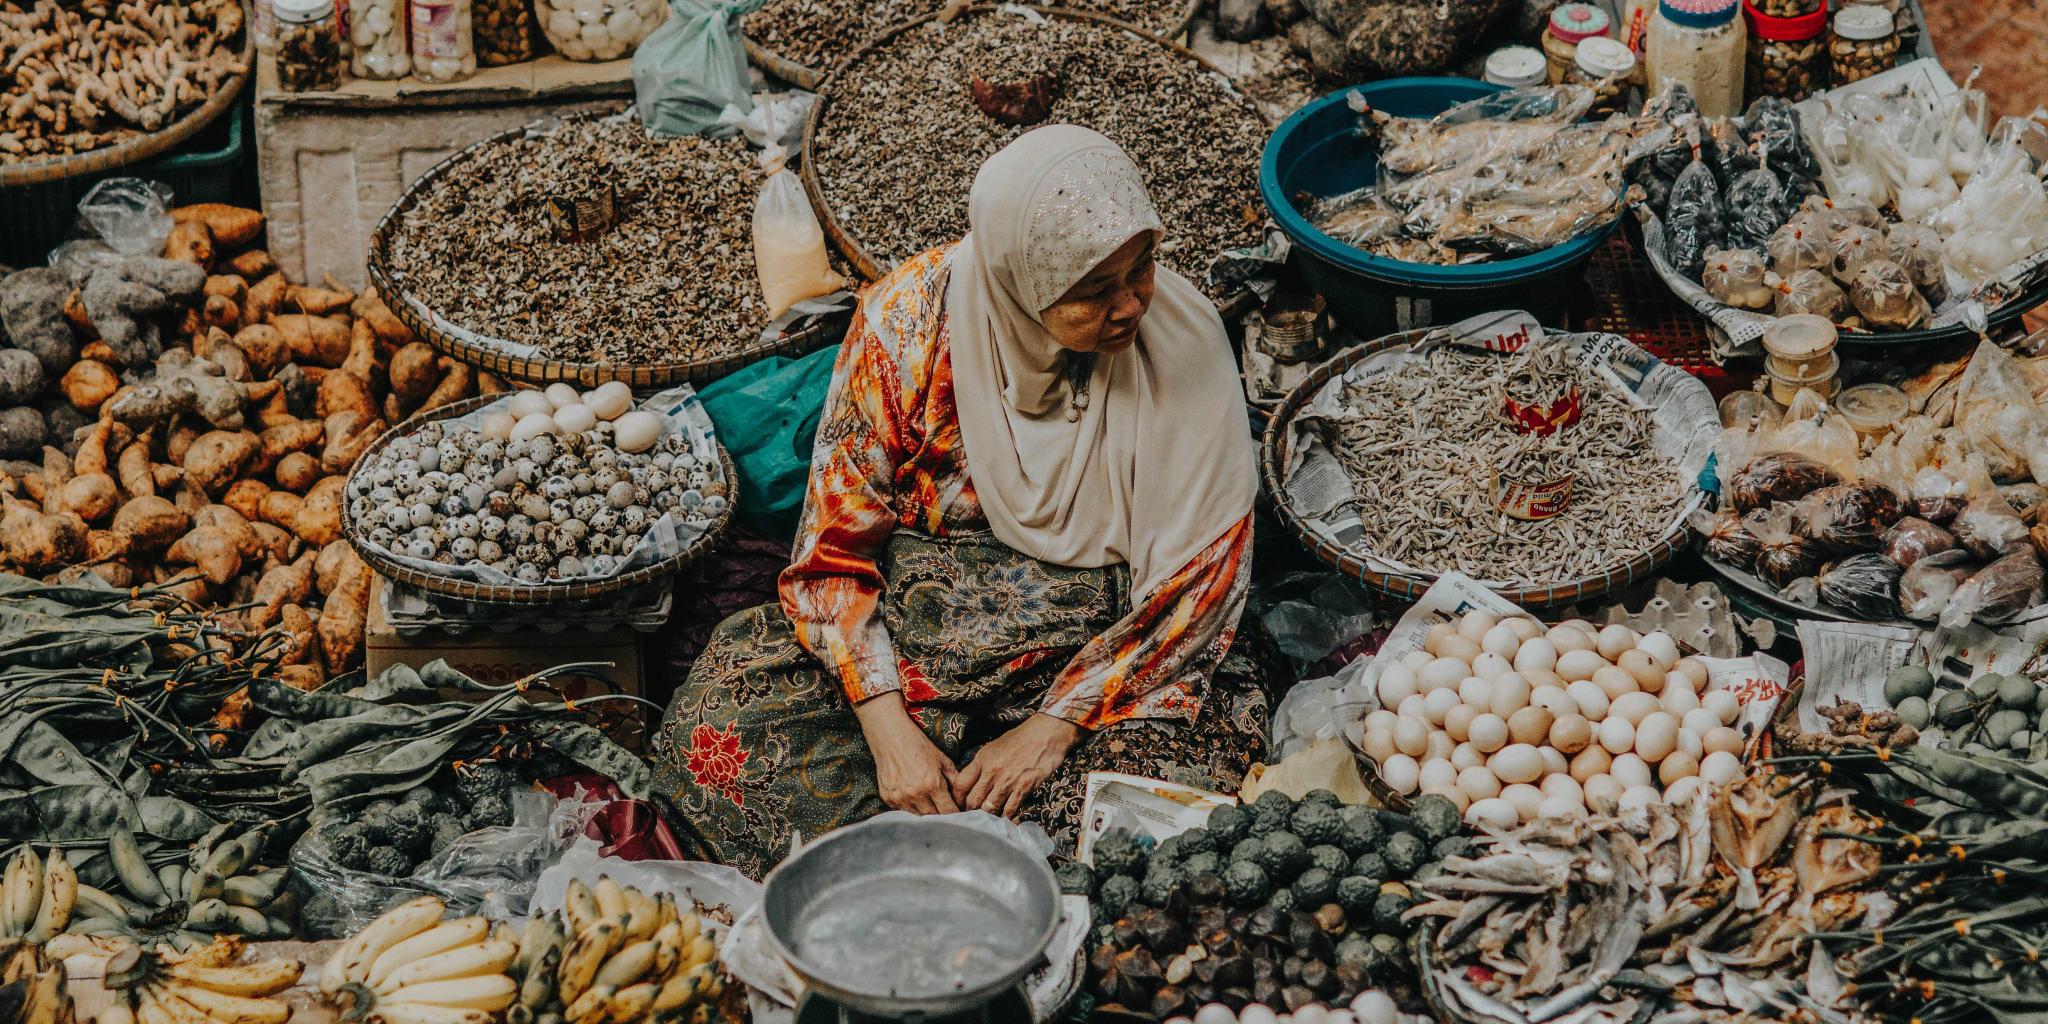 Old woman selling at the market in Malaysia